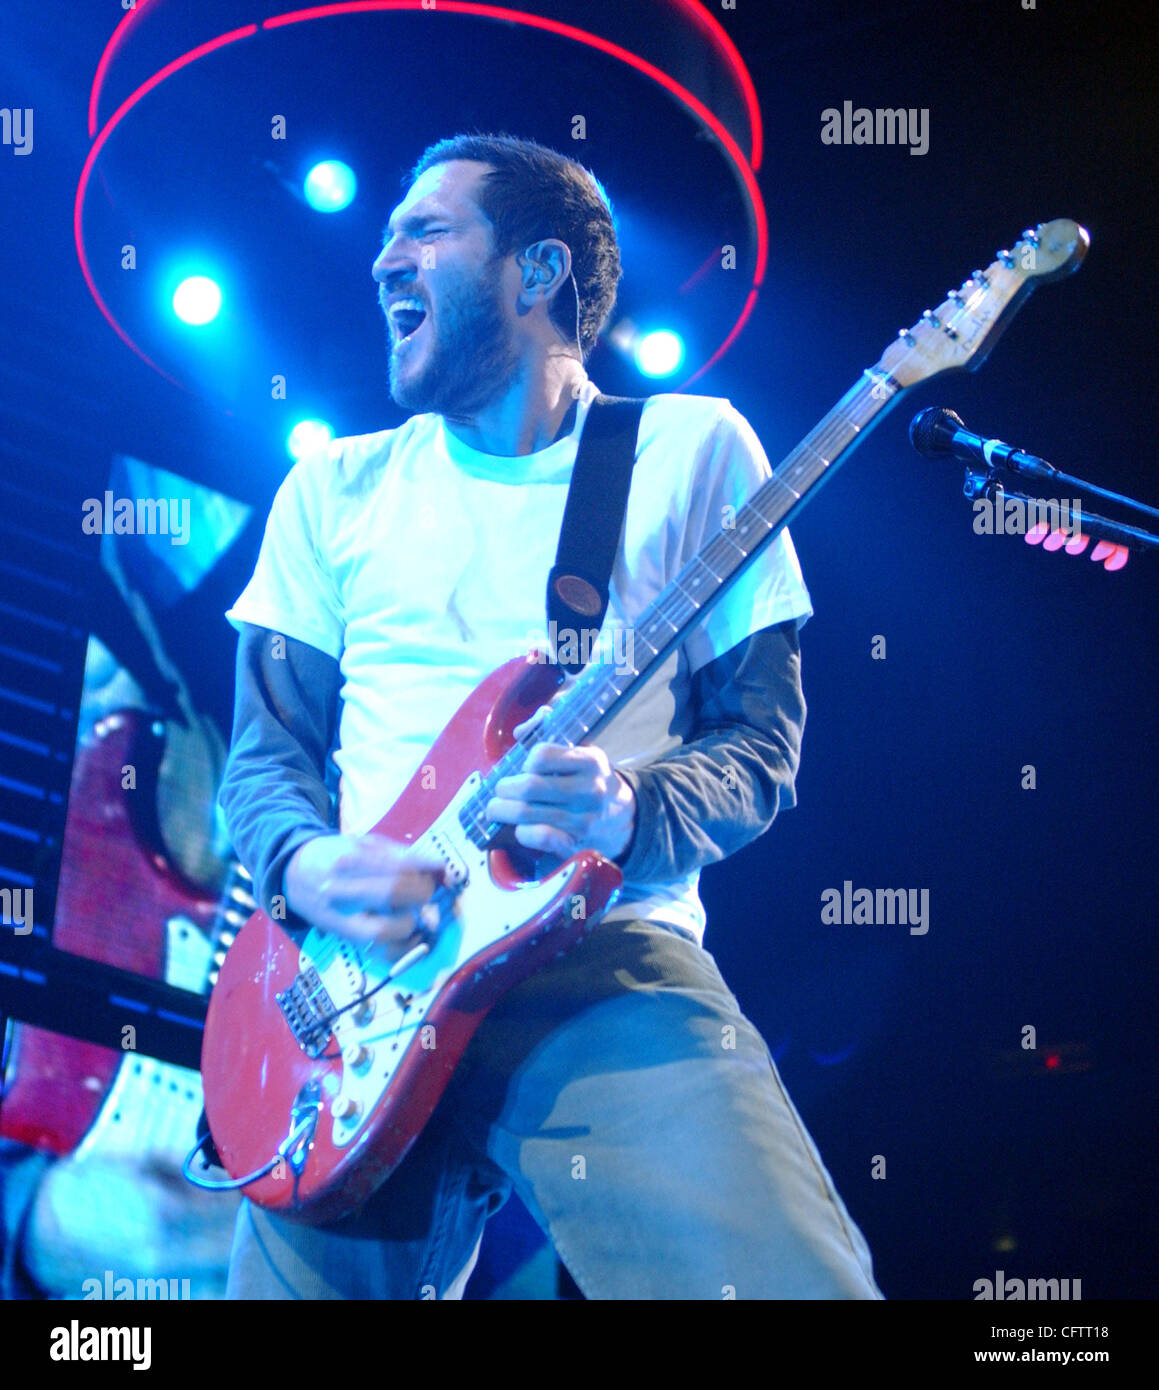 Jan. 22, 2007 Raleigh, NC; USA Guitarist JOHN FRUSCIANTE of the band The Red  Hot Chili Peppers perform live as there 2007 tour makes a stop at The RBC  Center located in